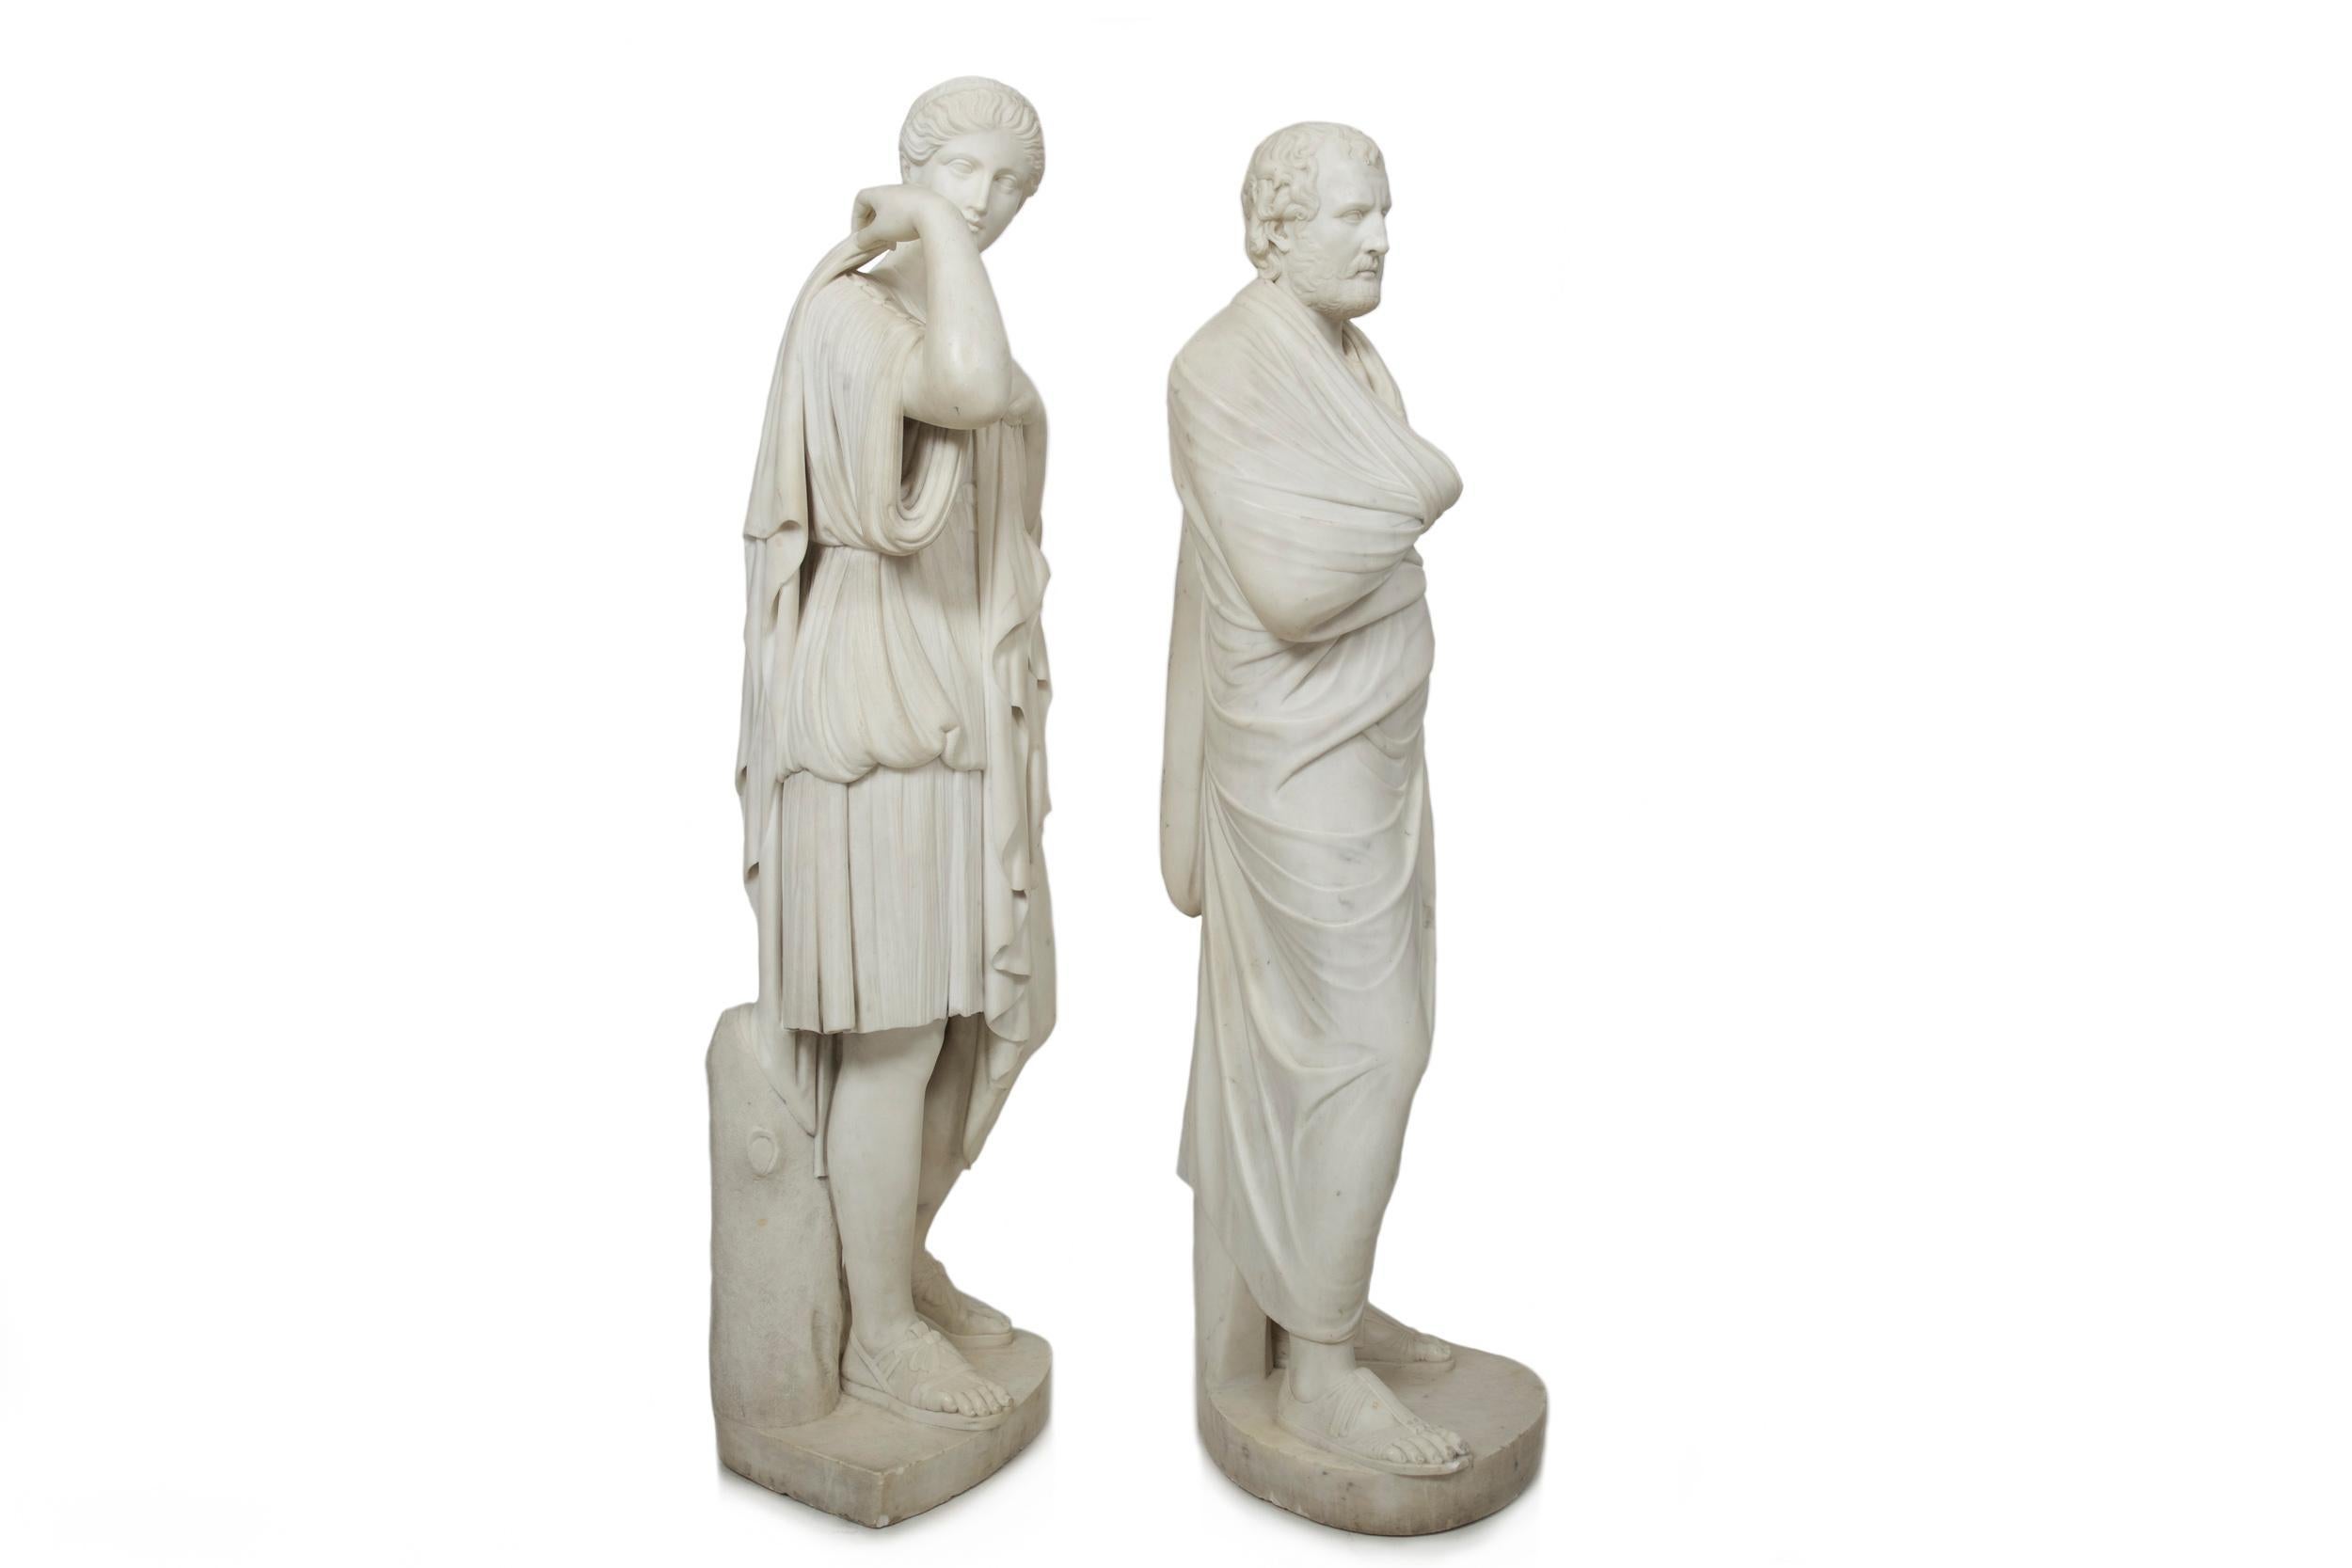 An incredibly fine and rare pair of full-length Classical statues of the goddess Artemis and the Greek orator Aeschines, both sculpted to be presented as a matched pair. Note the exquisite translucent Cararra marble with its soapy and silky texture,